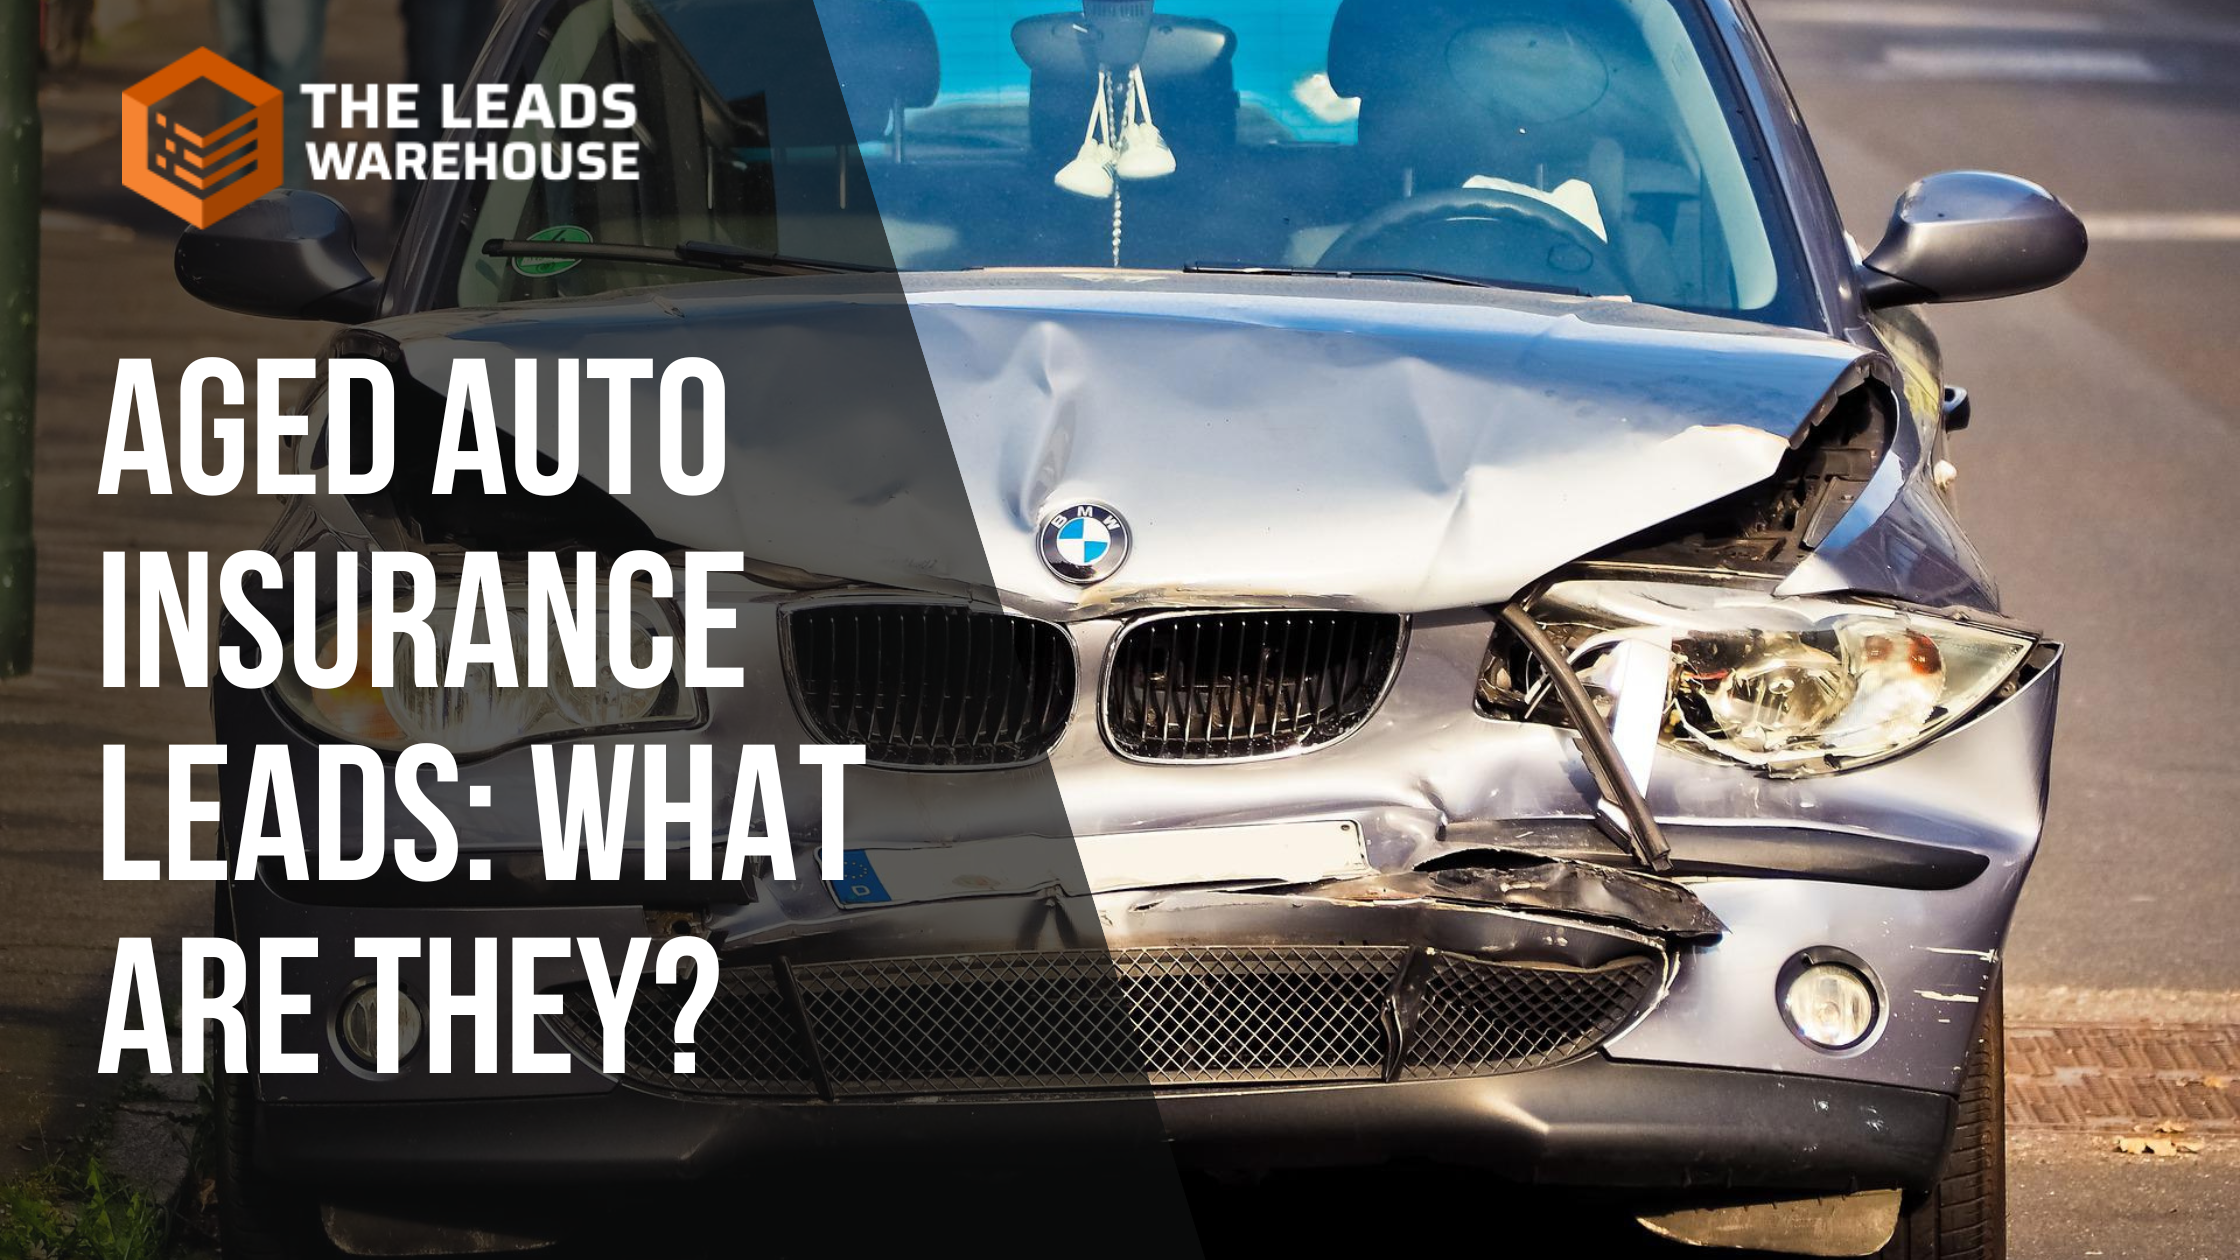 Aged Auto Insurance Leads